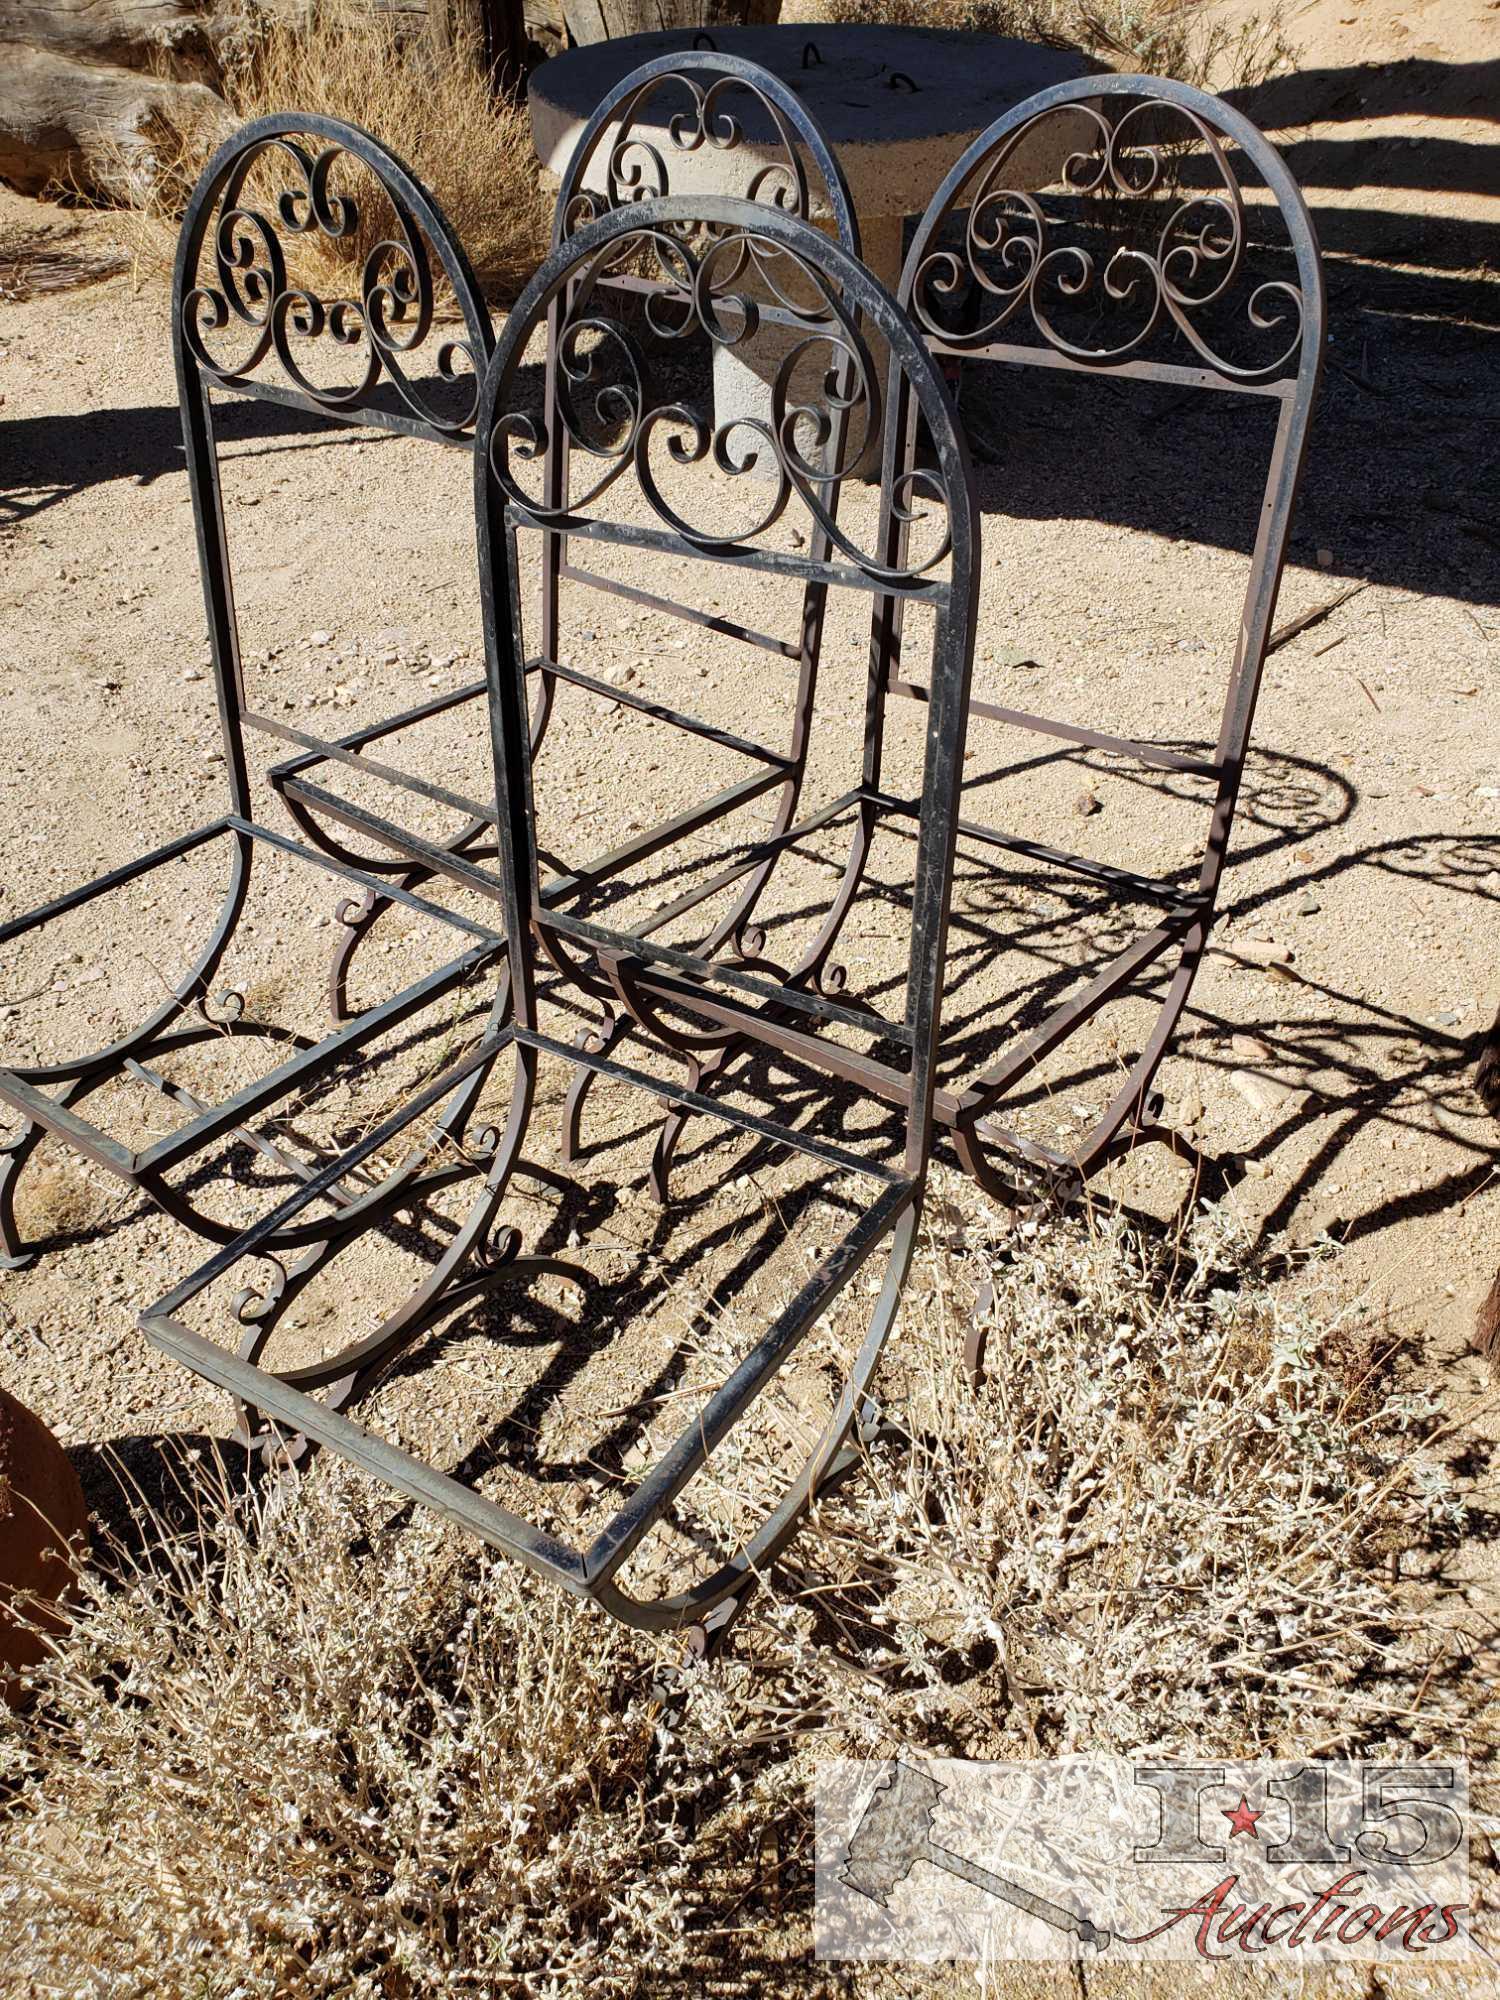 4 Vintage Metal Chairs and 1 Clay Pot